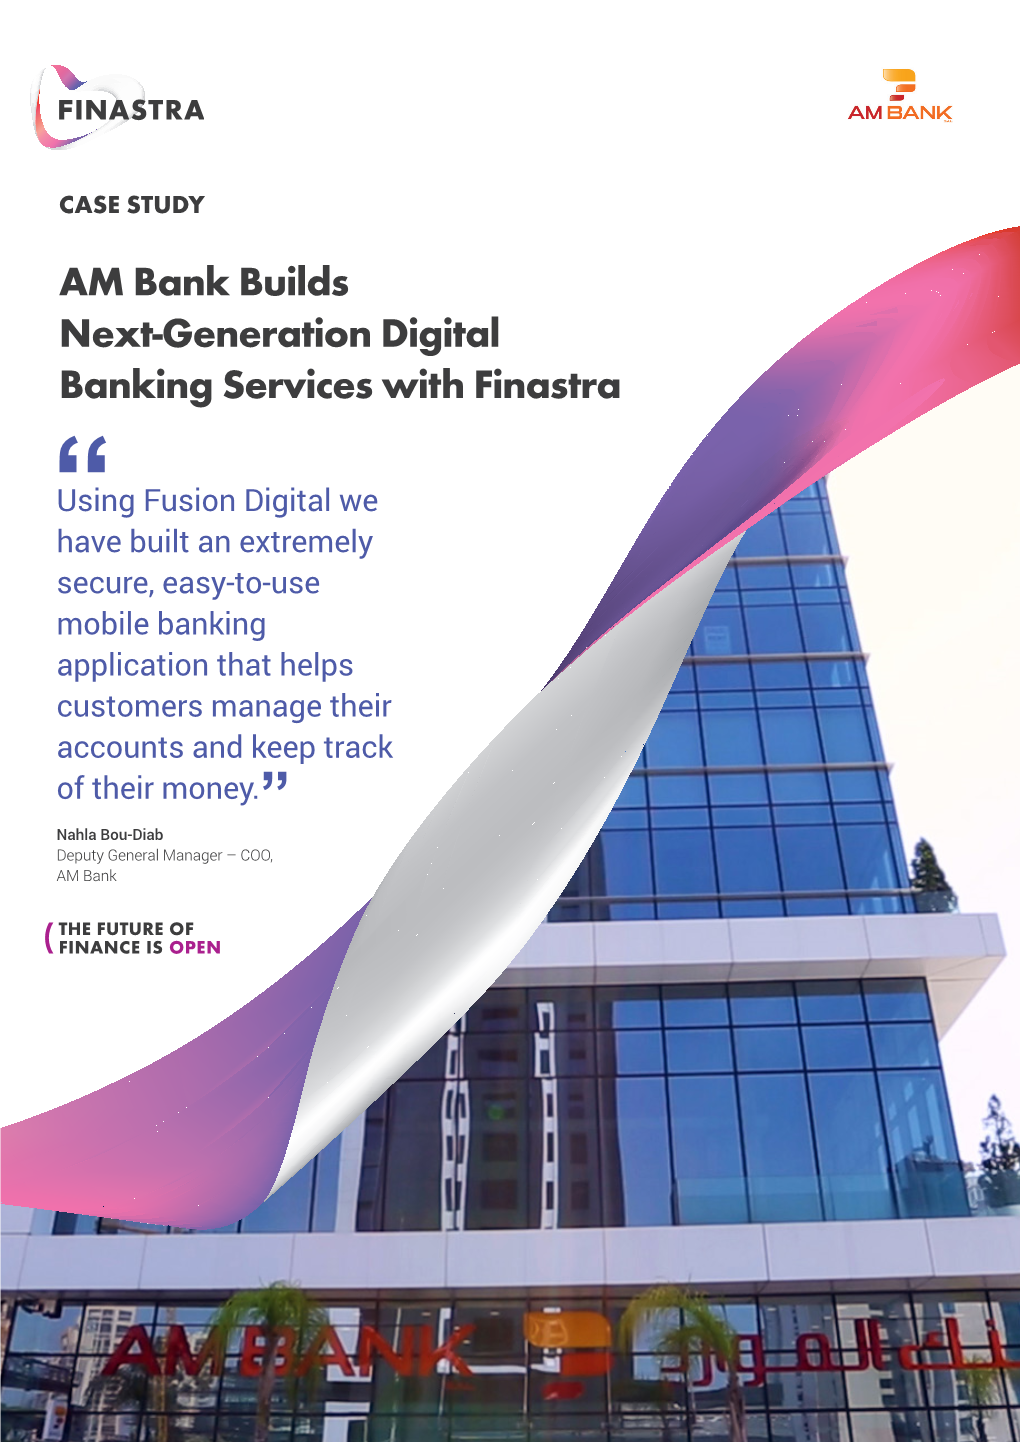 AM Bank Builds Next-Generation Digital Banking Services with Finastra